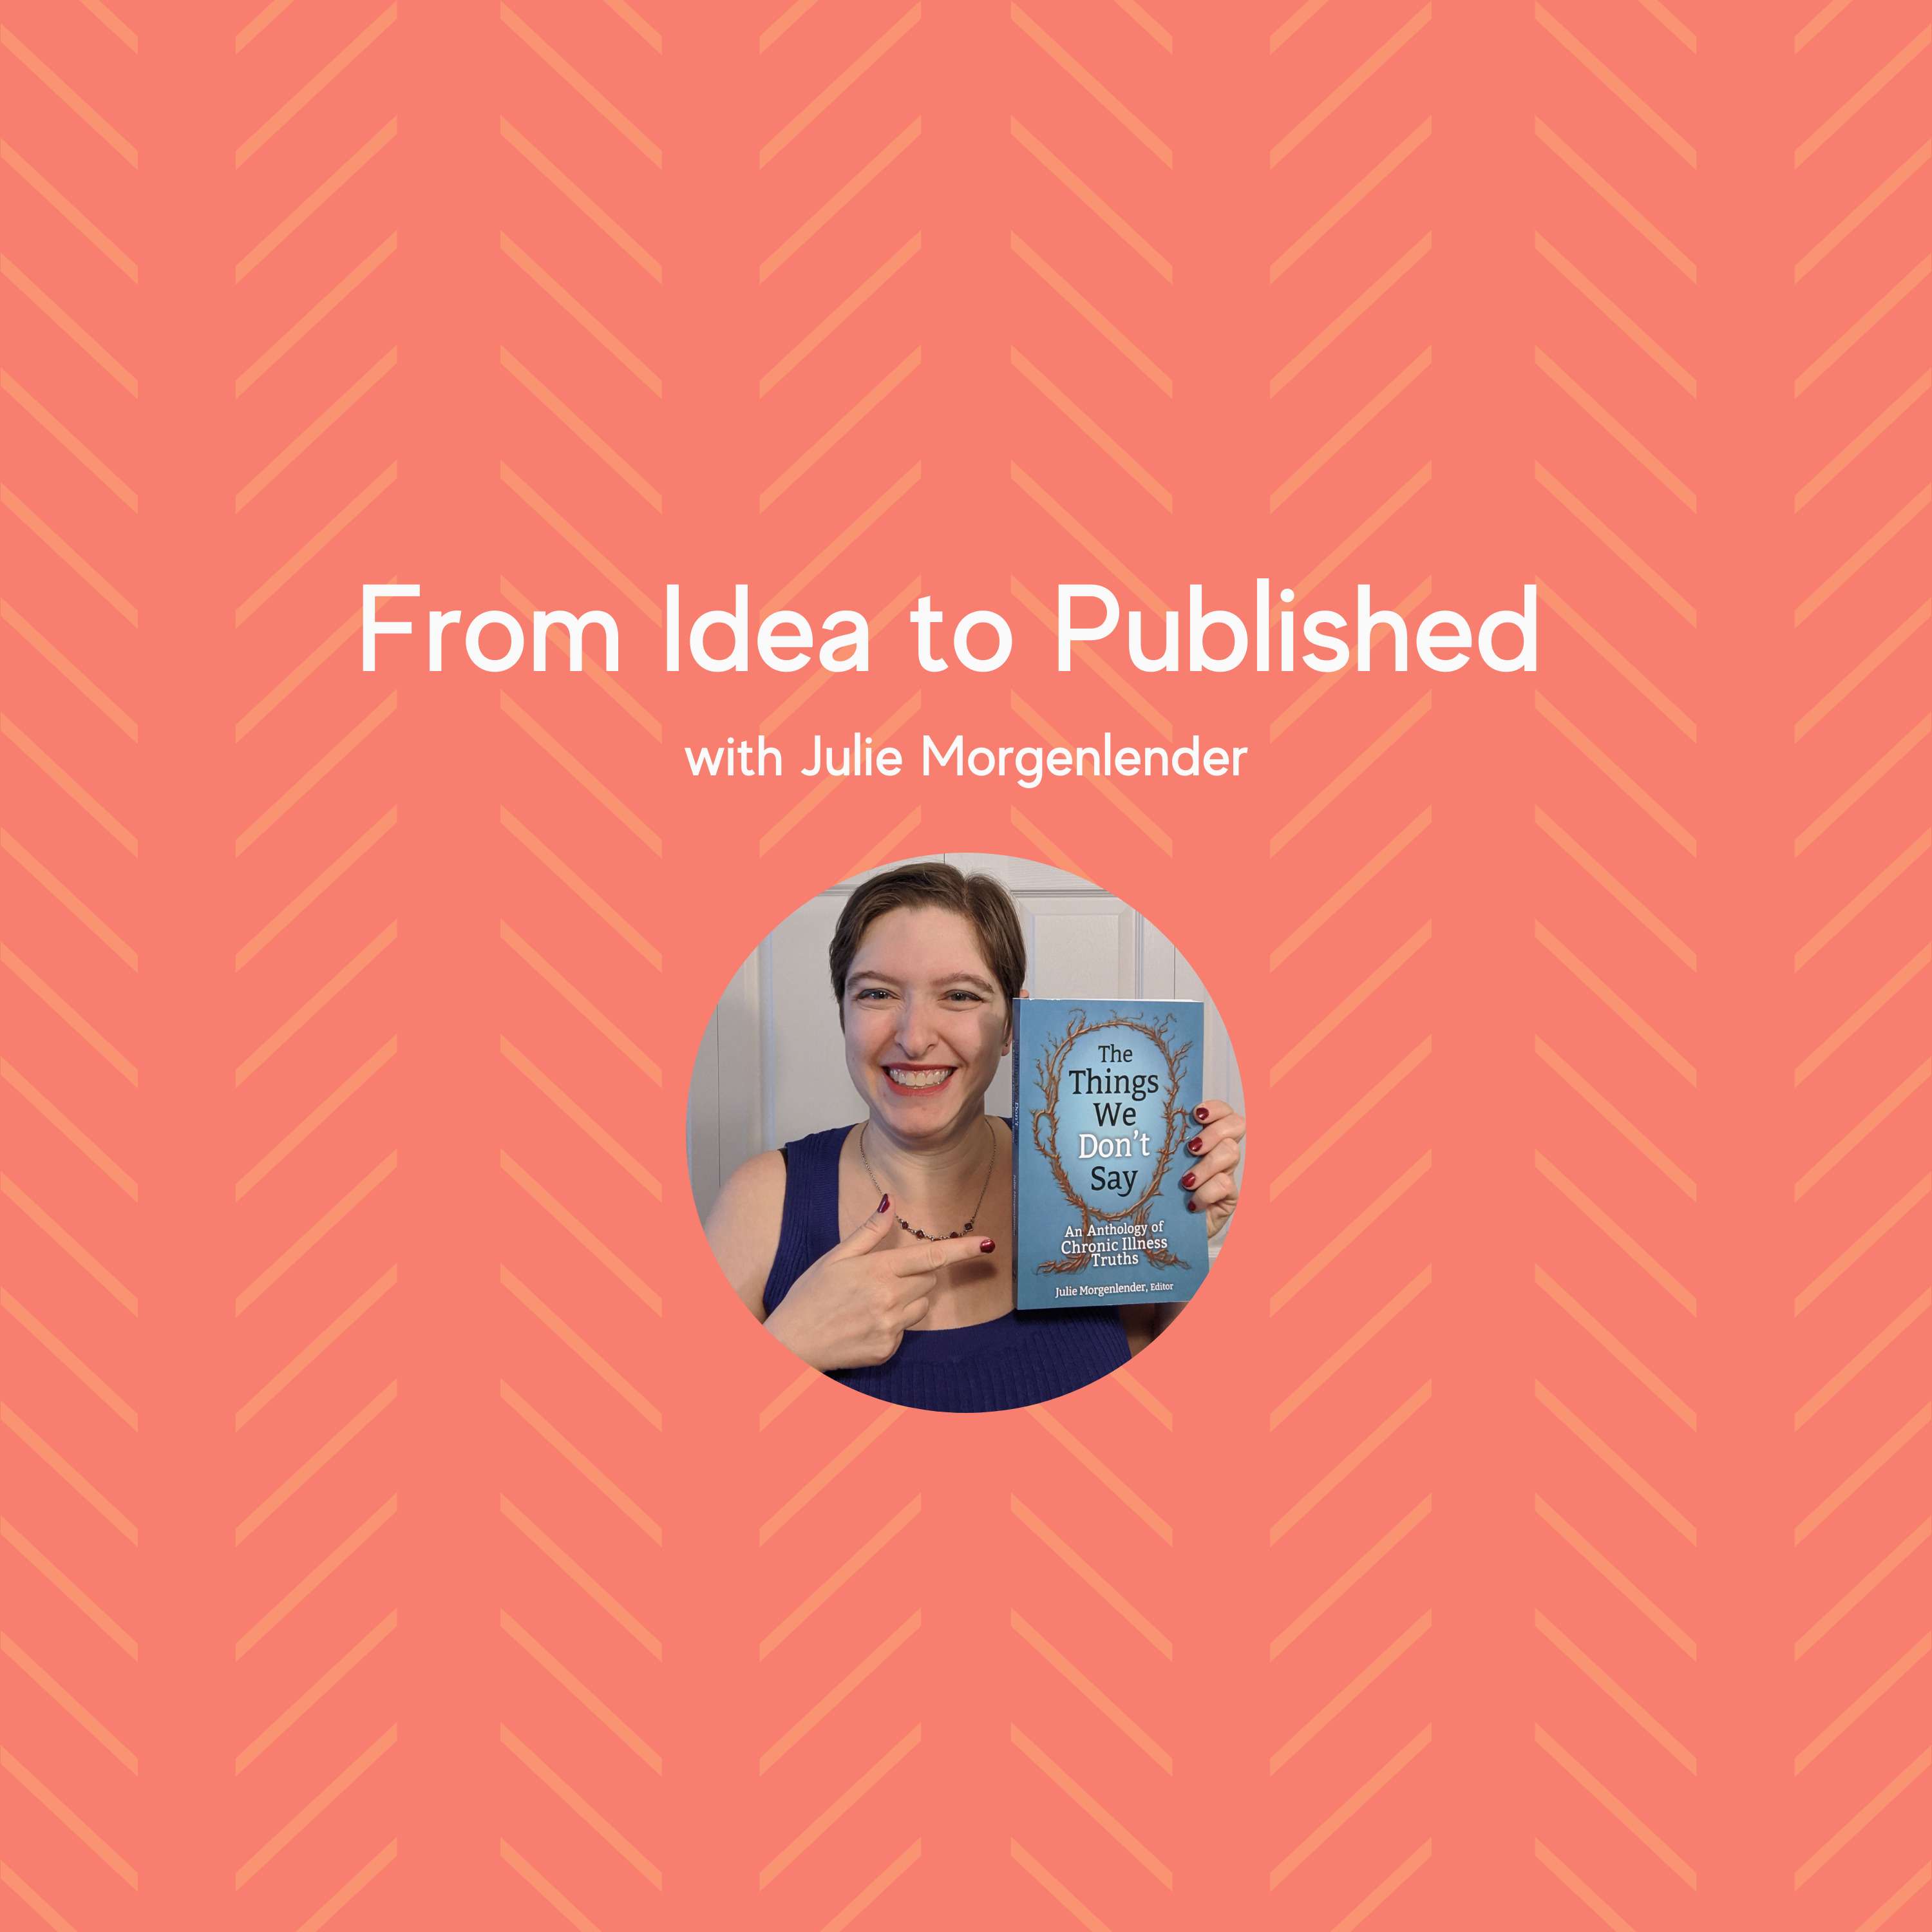 From Idea to Published with Julie Morgenlender